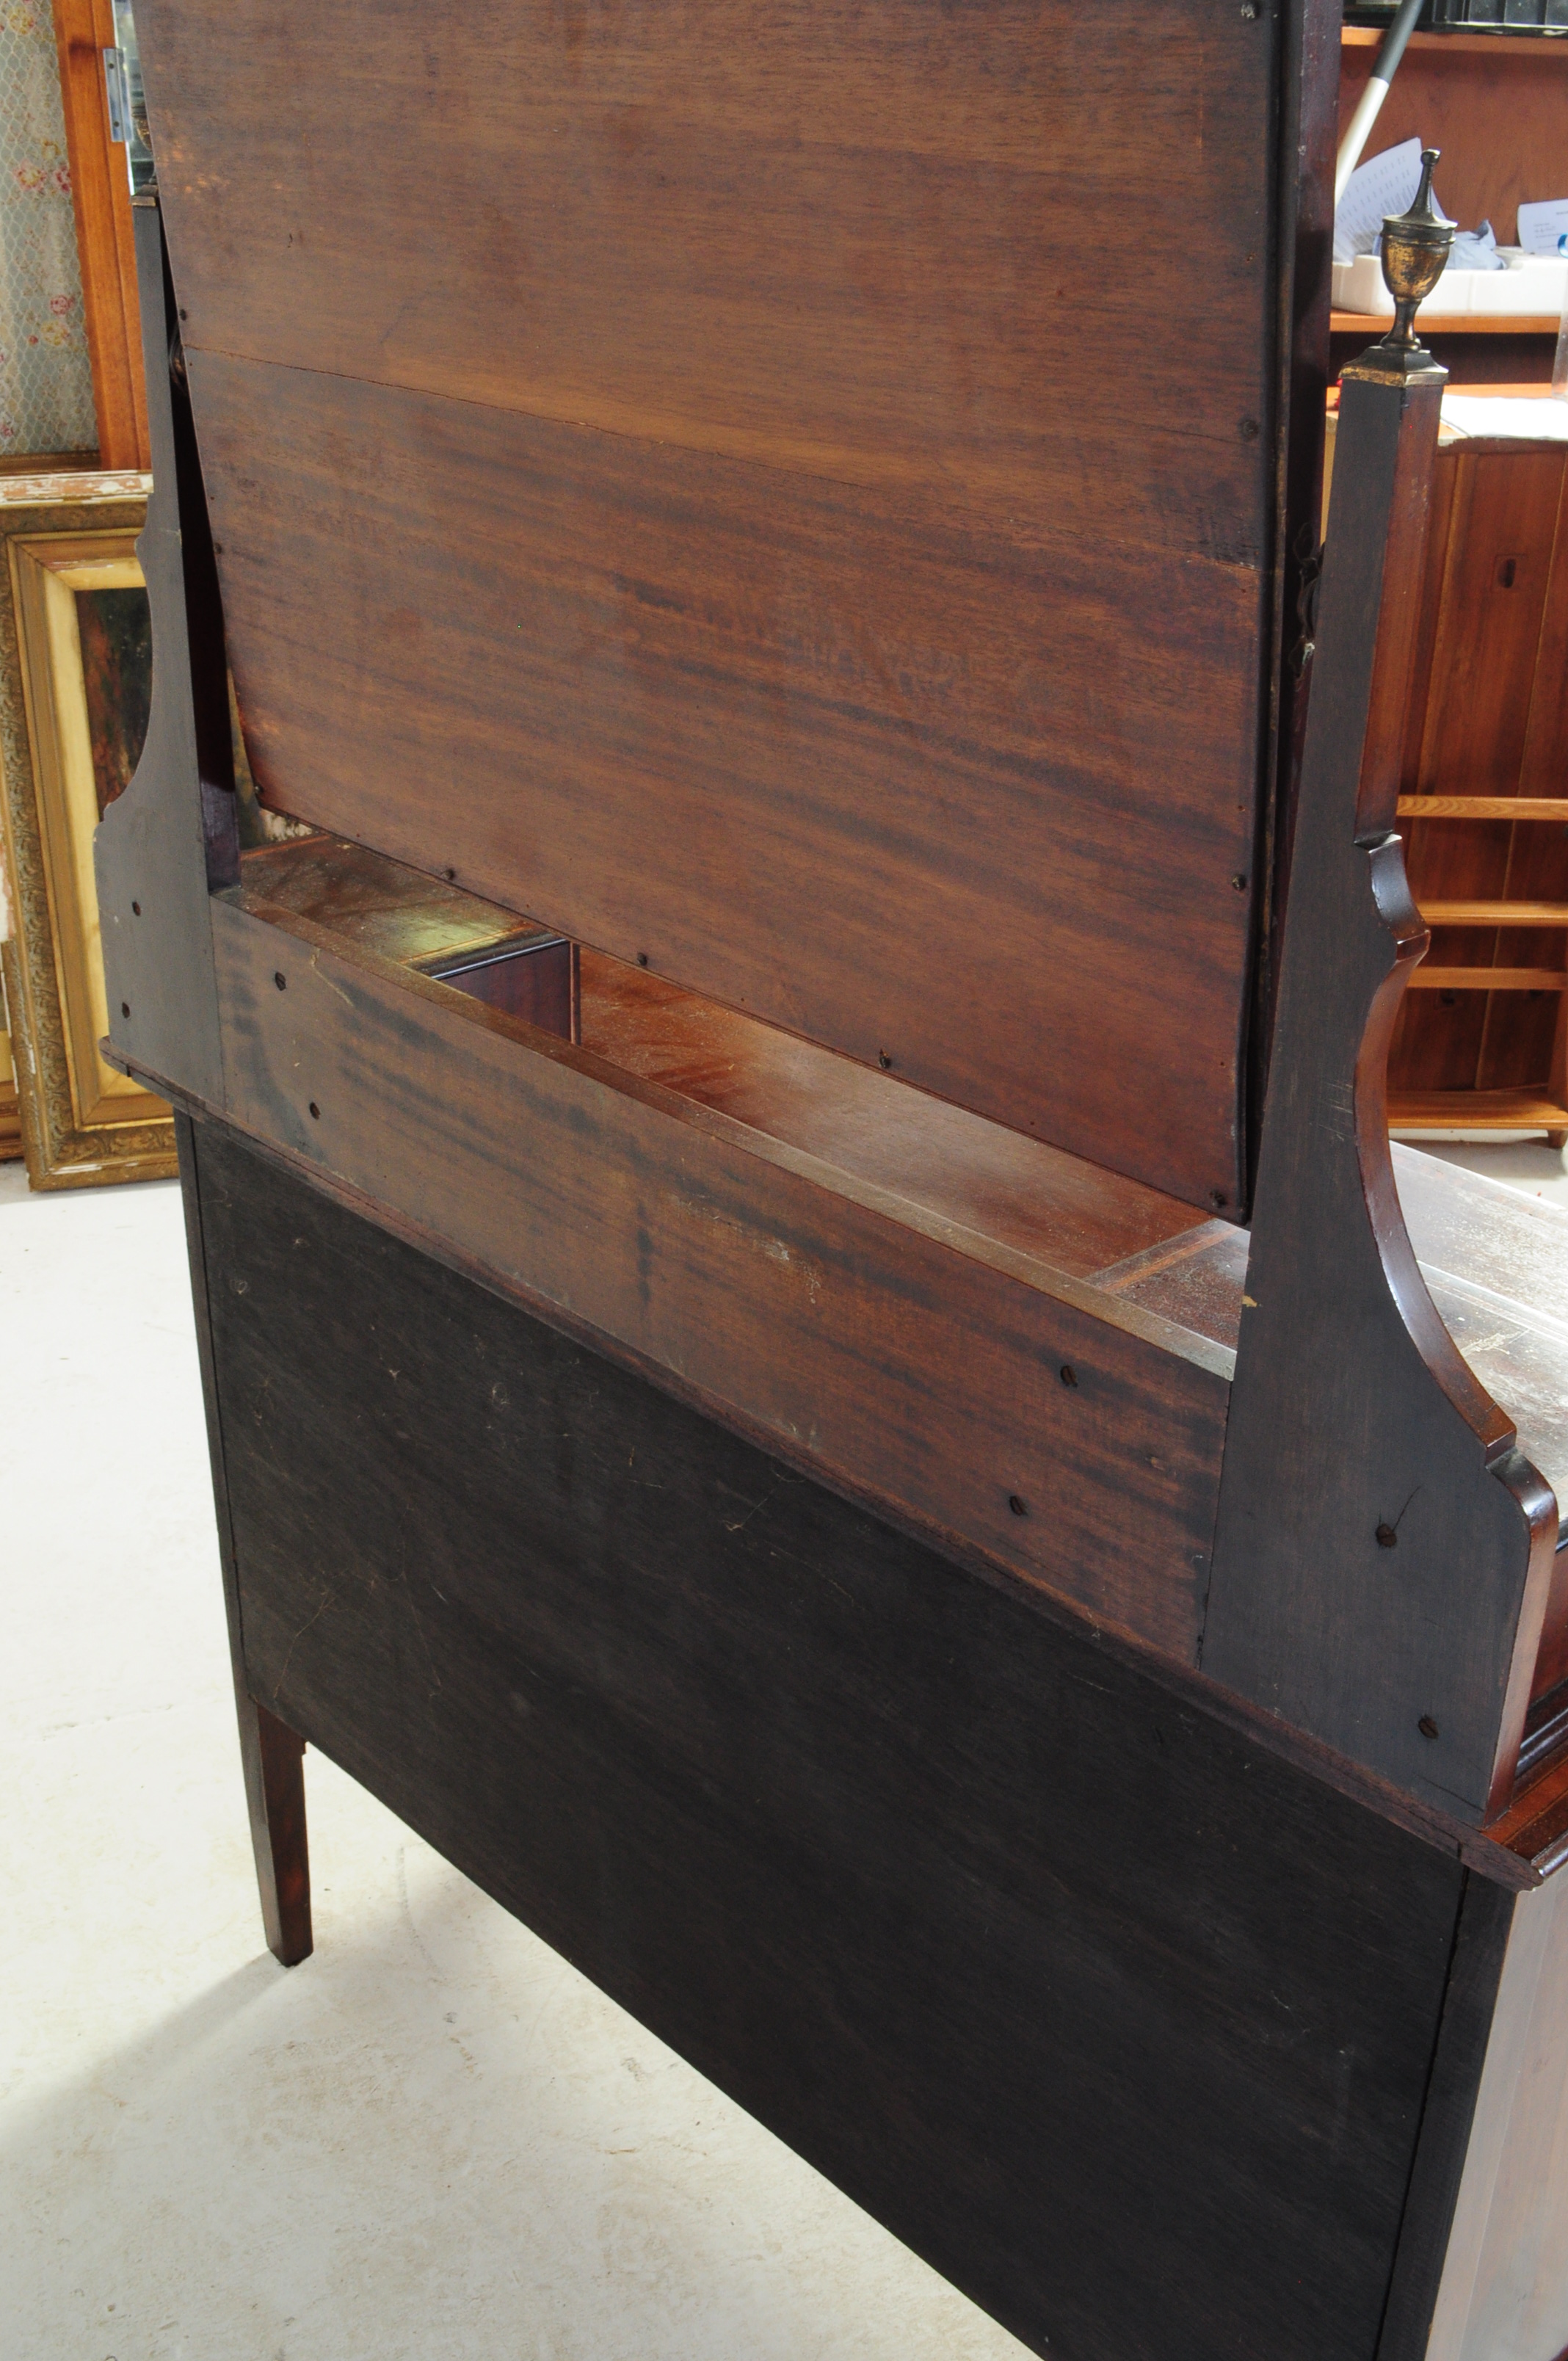 EDWARDIAN MAHOGANY & MARQUETRY DRESSING TABLE CHEST - Image 6 of 6